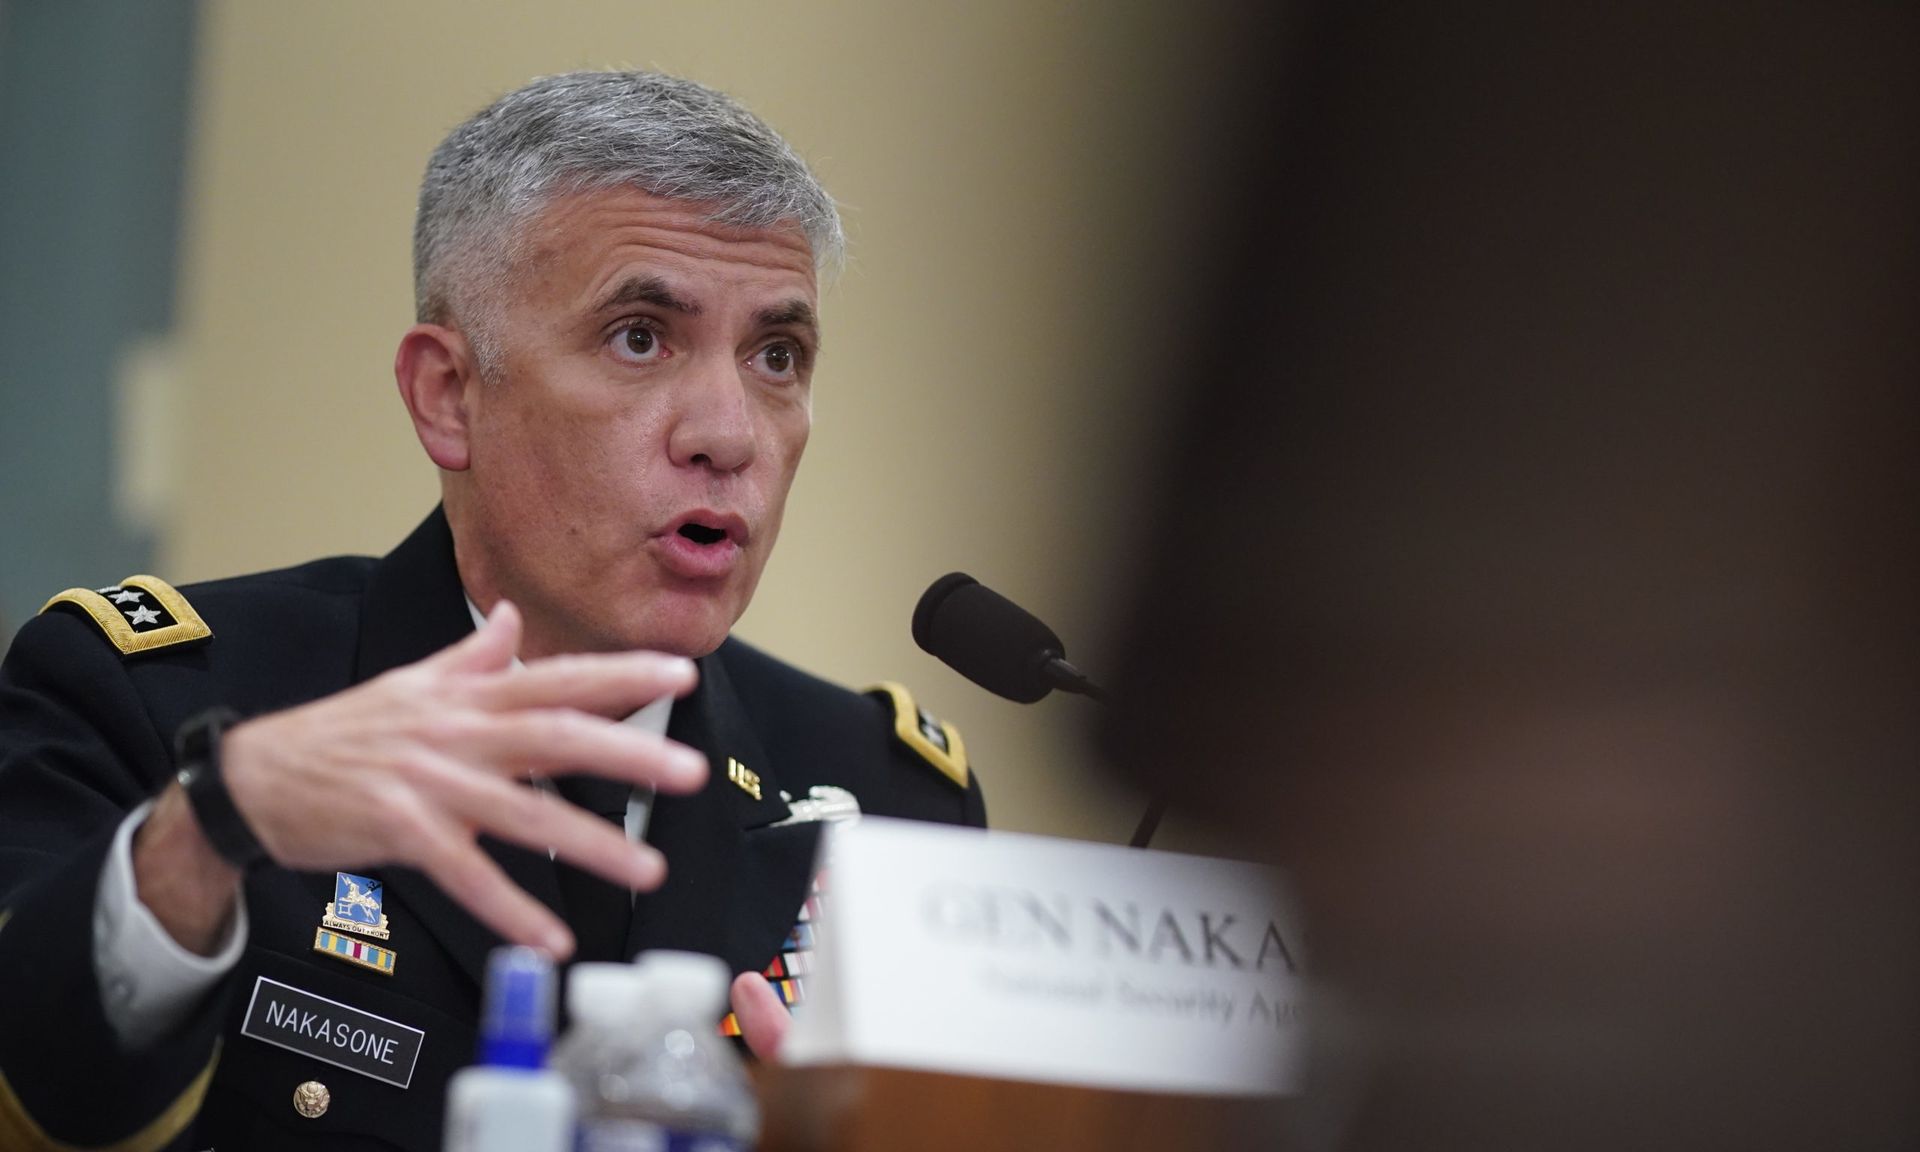 Paul Nakasone, director of the National Security Agency (NSA) and commander of the U.S. Cyber Command, speaks during a House Intelligence Committee hearing on April 15, 2021 in Washington, D.C. (Photo by Al Drago-Pool/Getty Images)